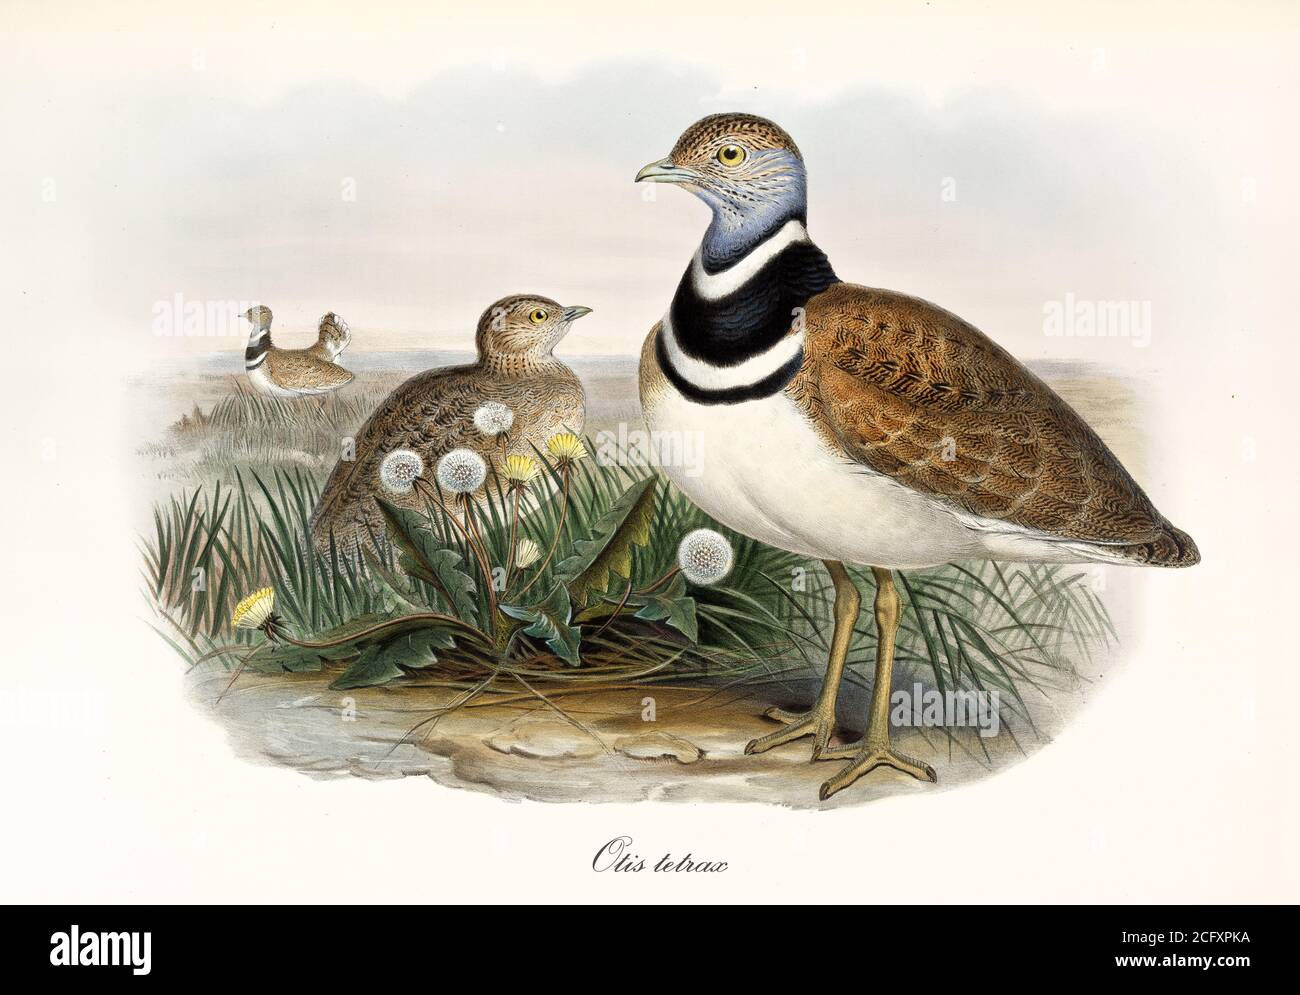 'Two little bustards on a grassy ground looking all around. Vintage style art of Little Bustard (Tetrax tetrax). By John Gould London 1862 – 1873' Stock Photo